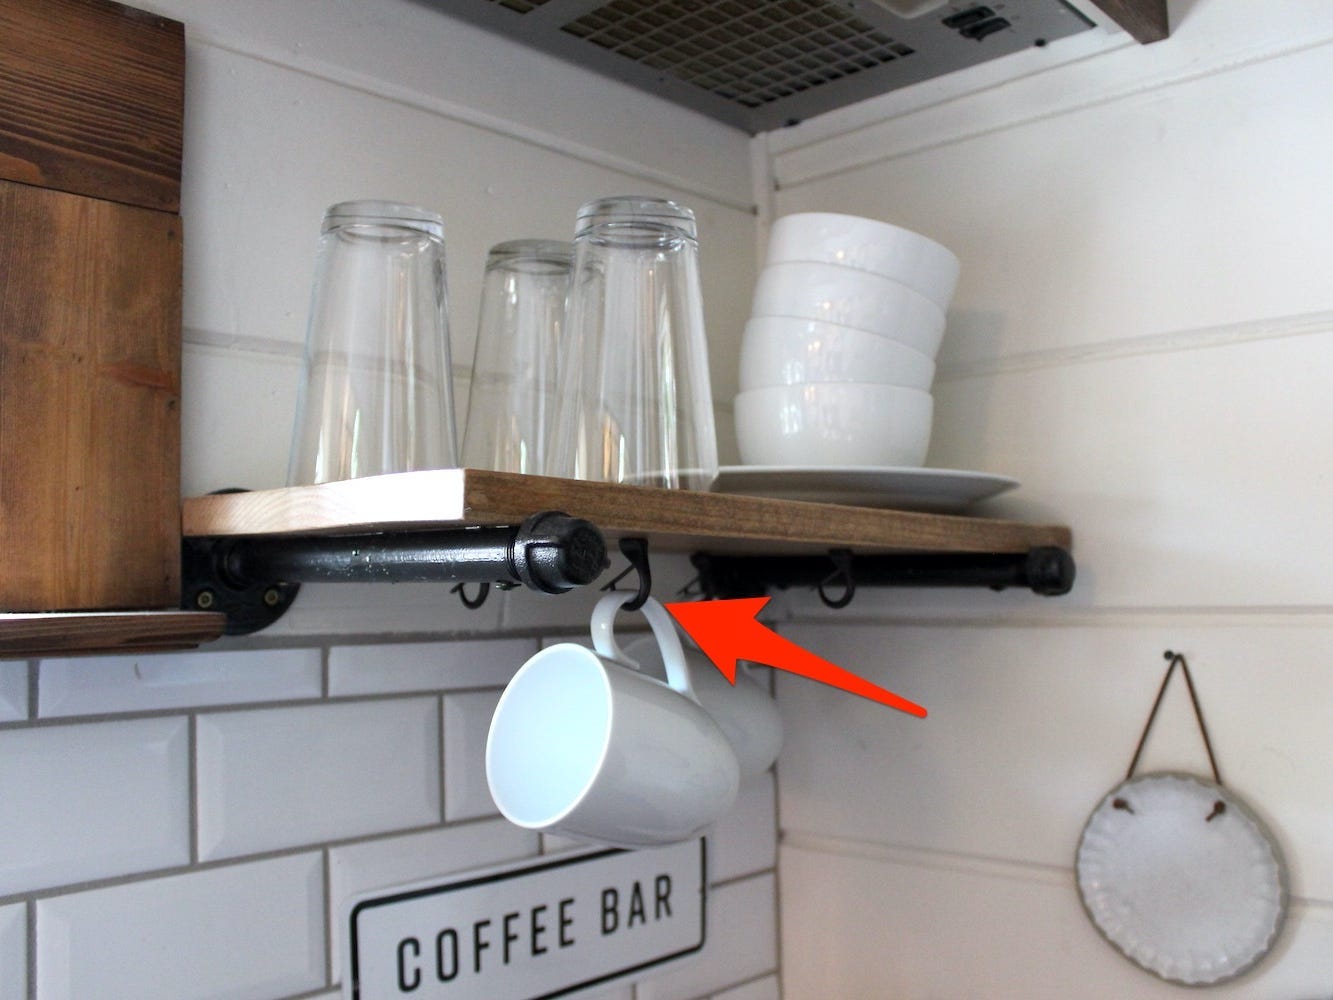 An arrow points to hooks where coffee mugs were stored in the tiny house.